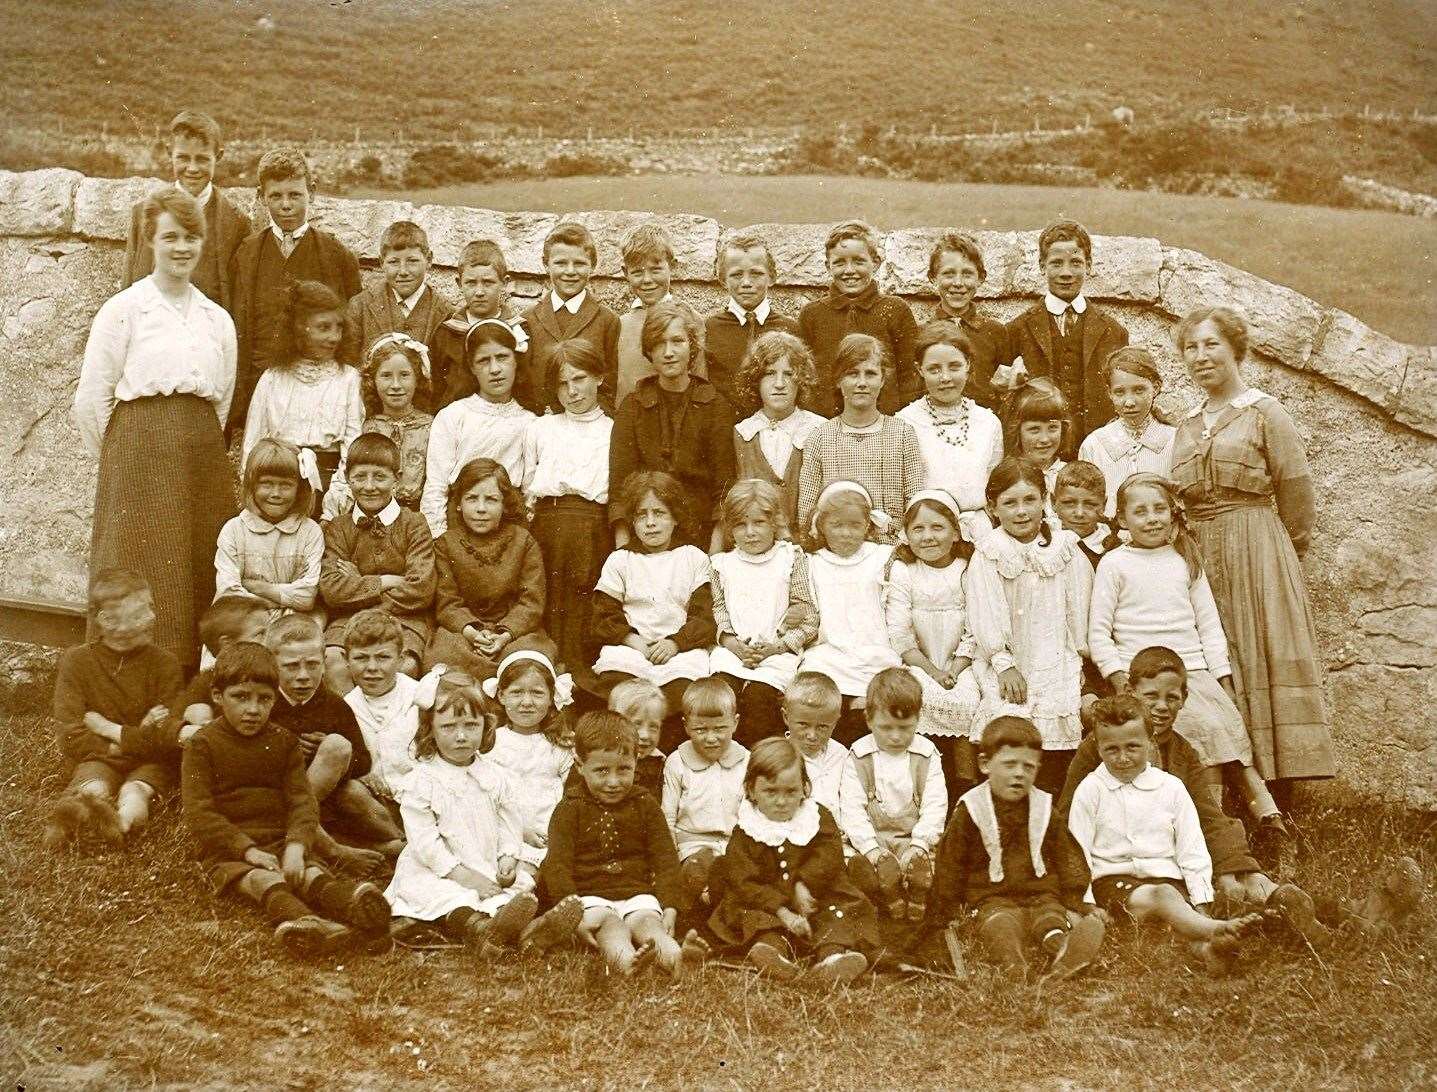 Portgower School class photo from the early 1900s.